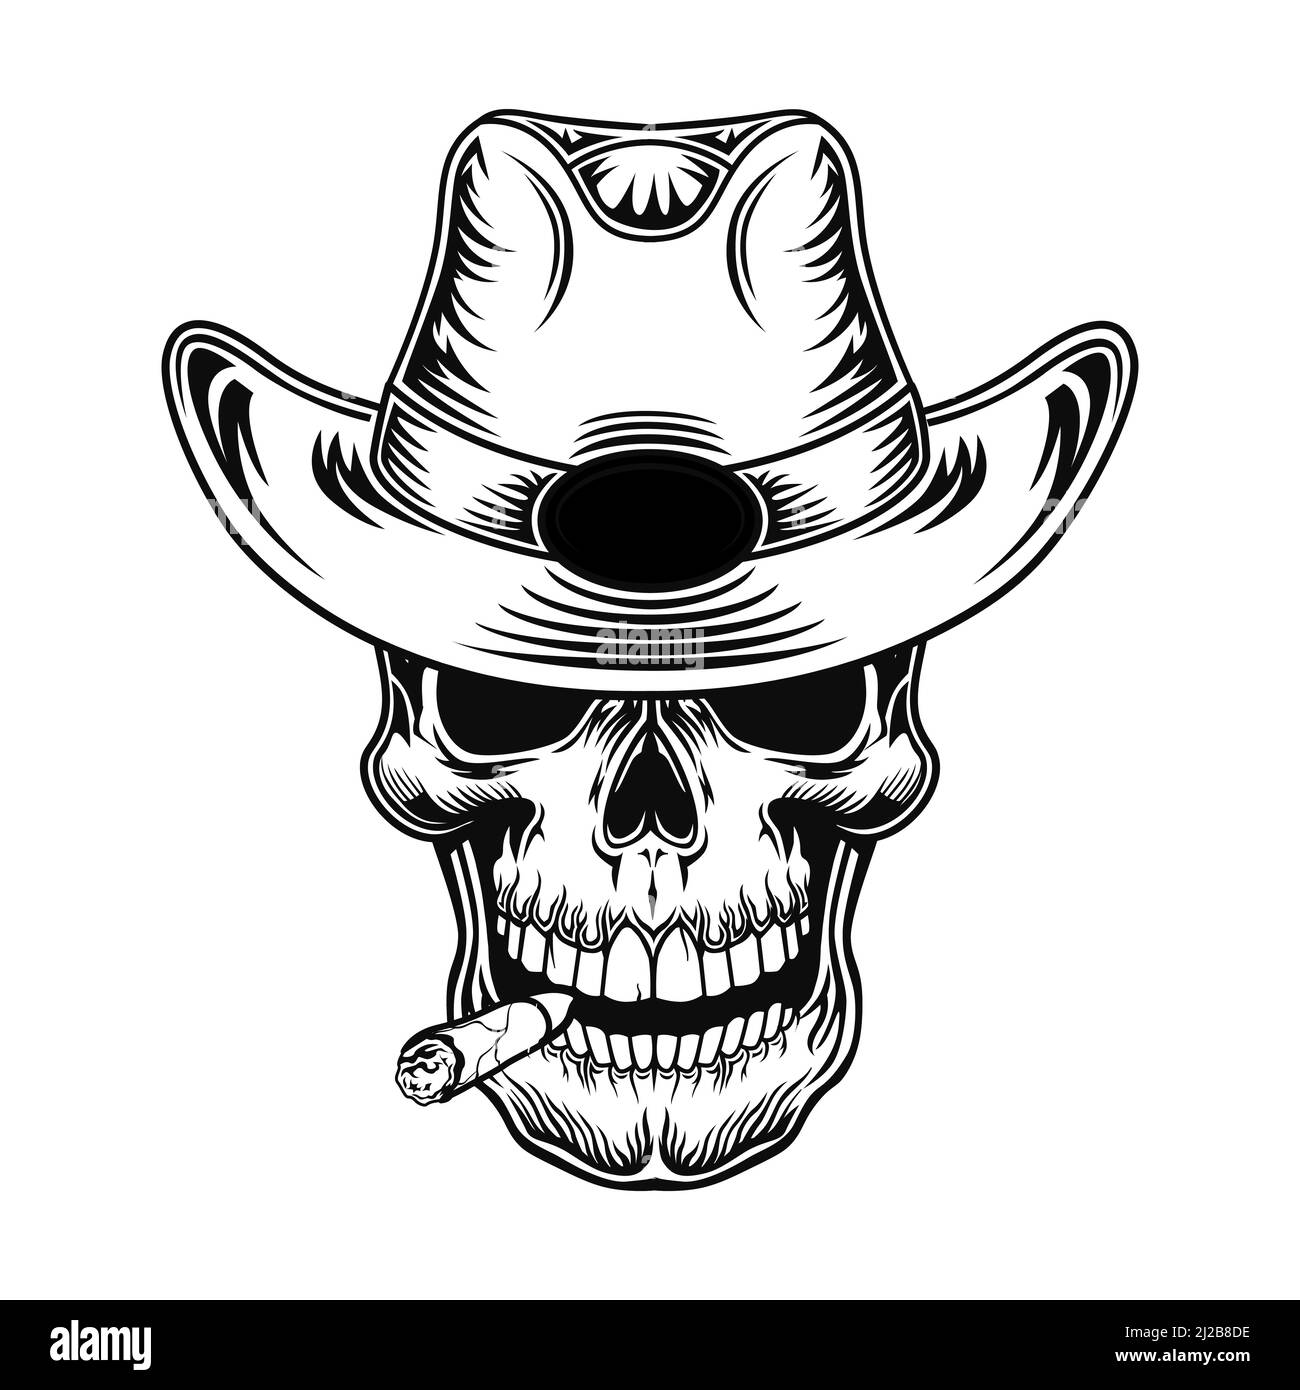 Skull of cowboy vector illustration. Head of character in hat with ...